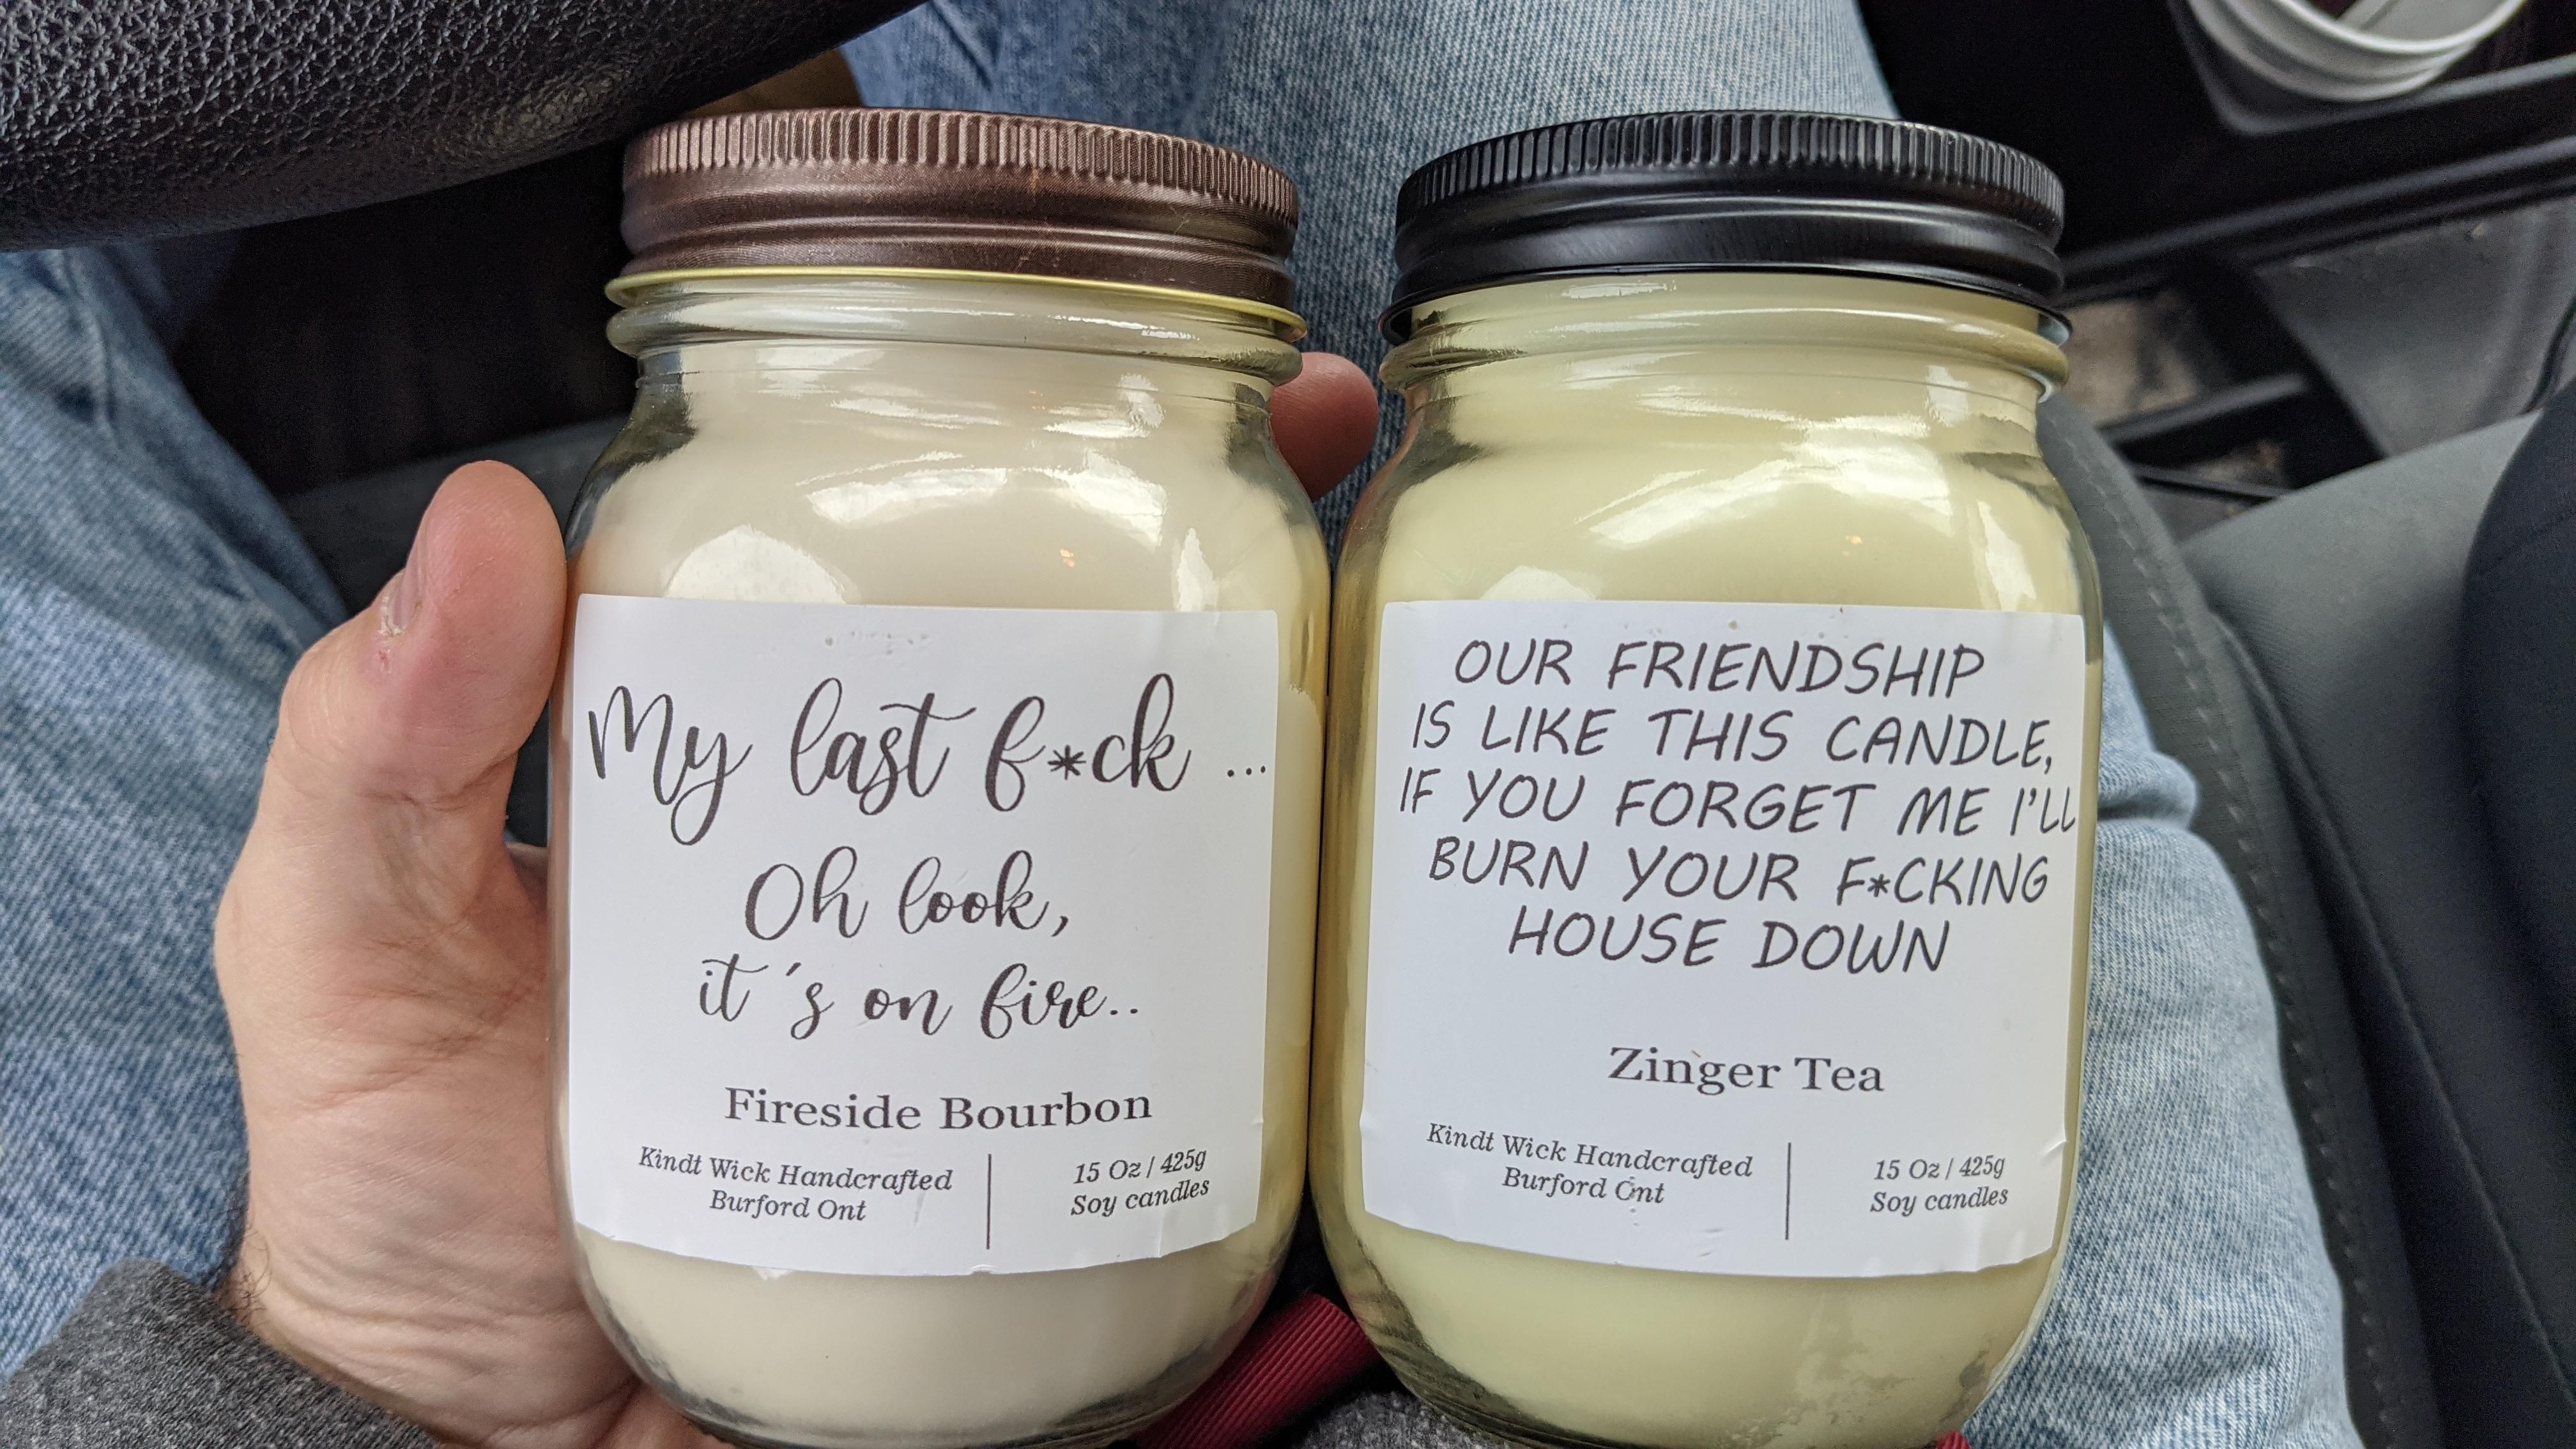 New candles my cousin made for 2020! Had to get some.